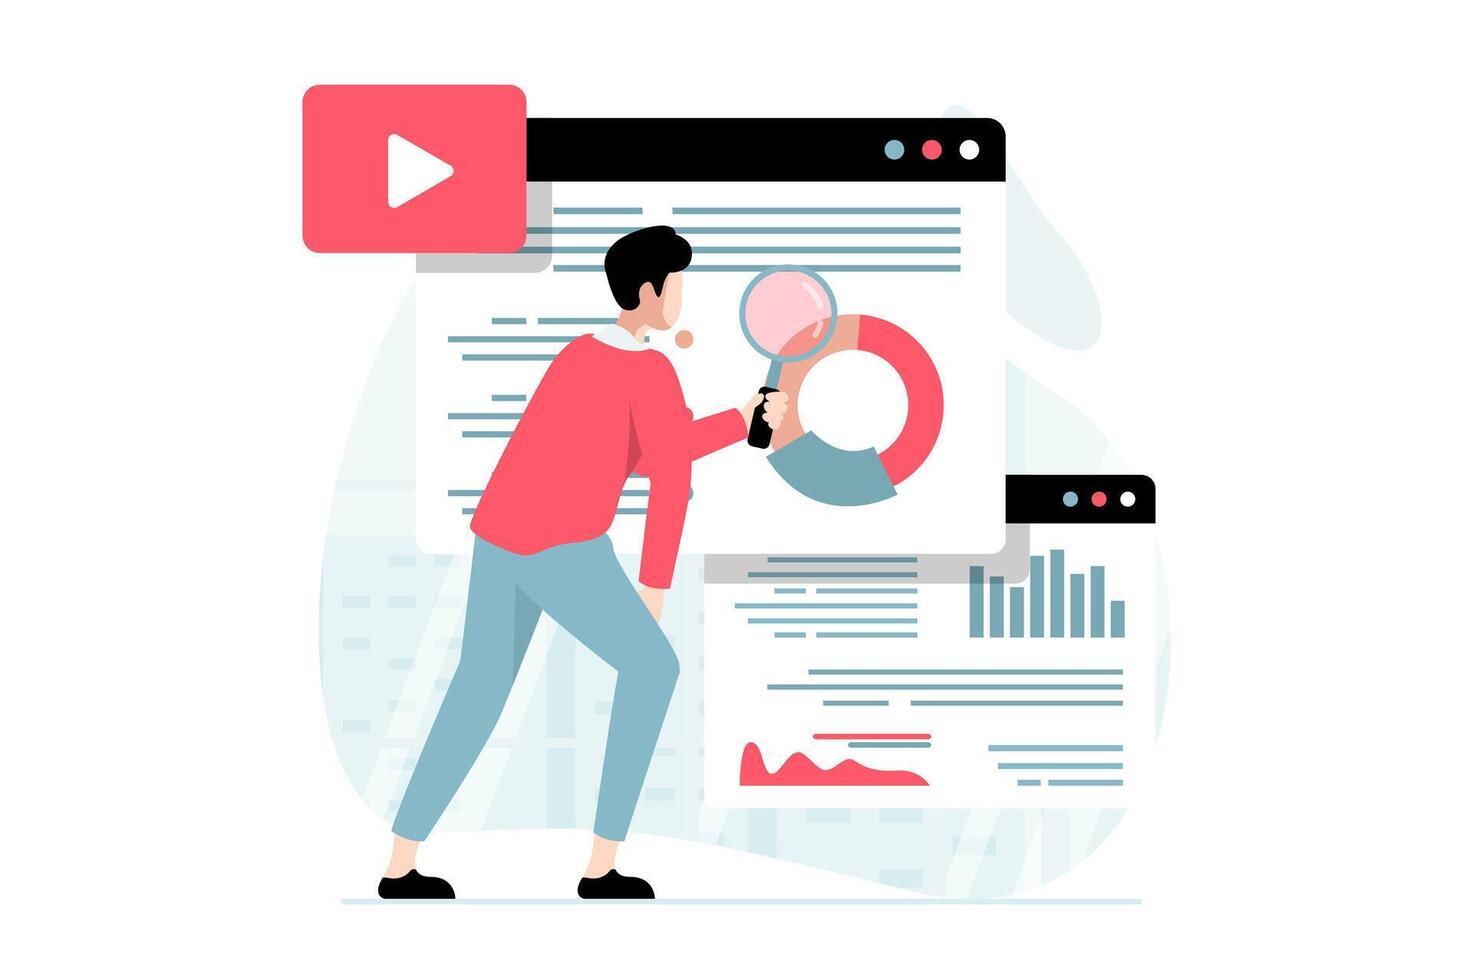 Data science concept with people scene in flat design. Man looking at magnifier, studying statistics at screen, working with graphs and charts. illustration with character situation for web vector